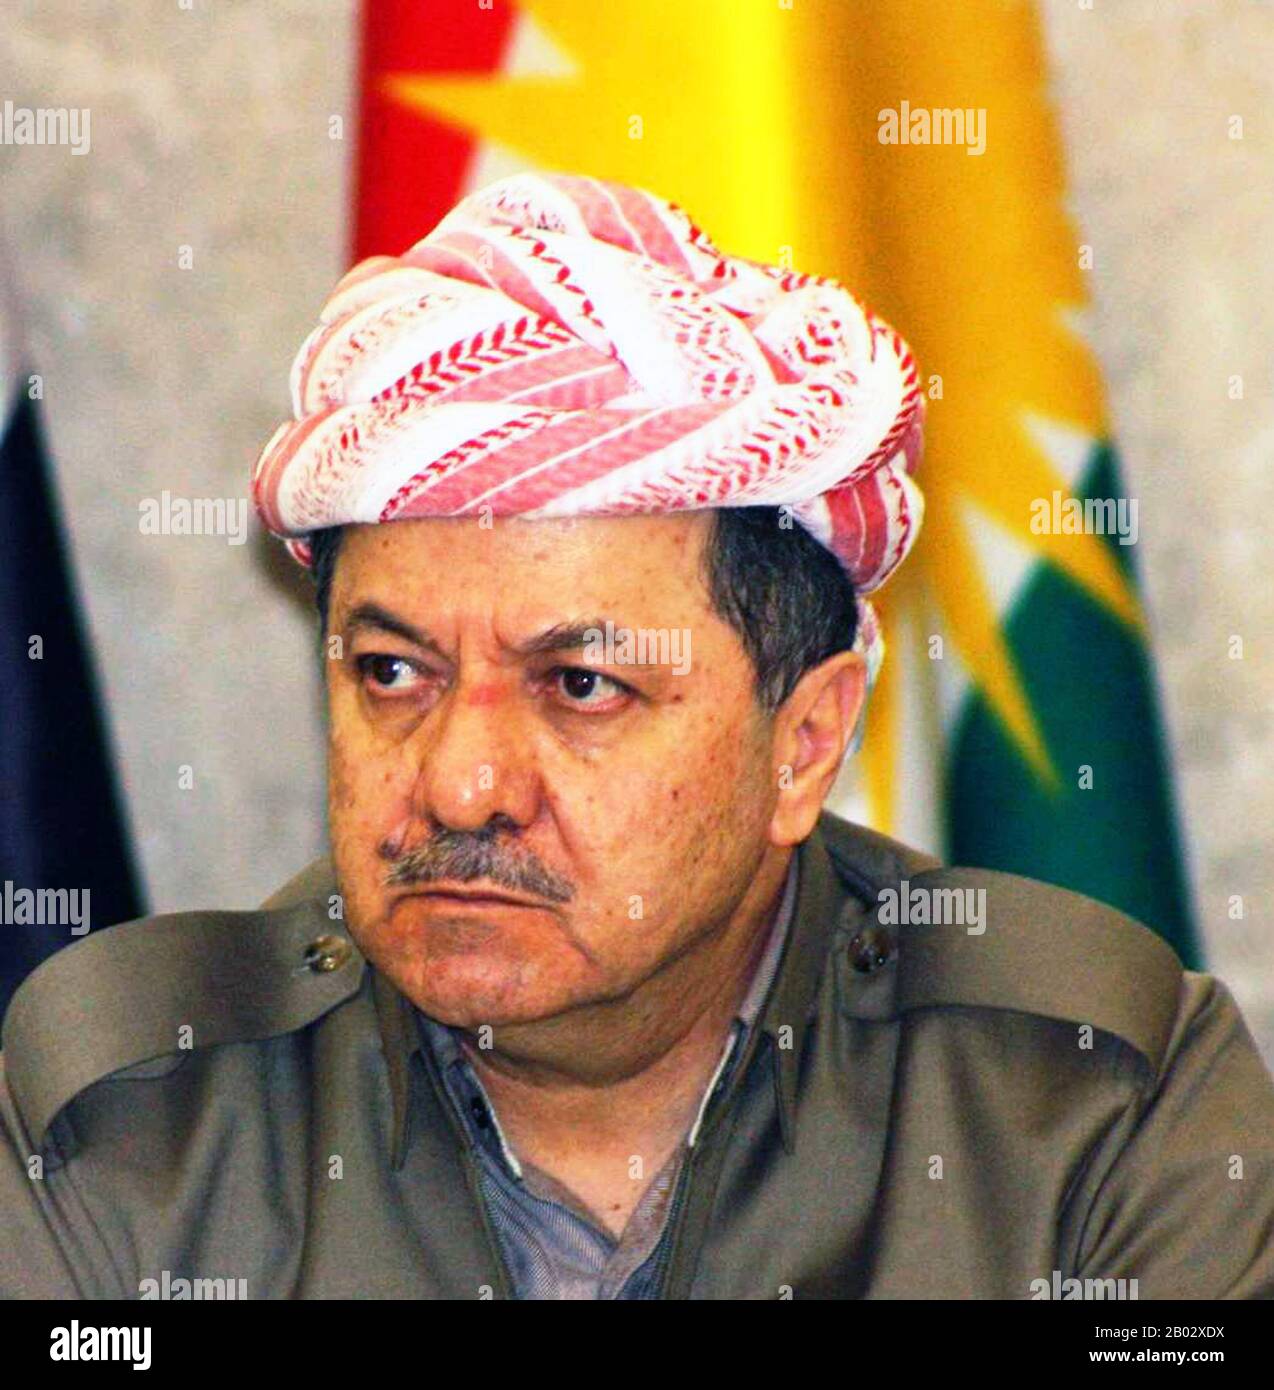 Masoud Barzani (Kurdish: Mesud Barzanî; born 16 August 1946) is an Iraqi Kurdish politician who has been President of the Iraqi Kurdistan Region since 2005, as well as leader of the Kurdistan Democratic Party (KDP) since 1979.  Masoud Barzani succeeded his father, the Kurdish nationalist leader Mustafa Barzani, as the leader of the KDP in 1979. Working closely with his brother Idris Barzani until Idris' death, Barzani and various other Kurdish groups fought Baghdad during the Iran-Iraq War. For much of this time, the Kurdish leadership was exiled to Iran. Stock Photo